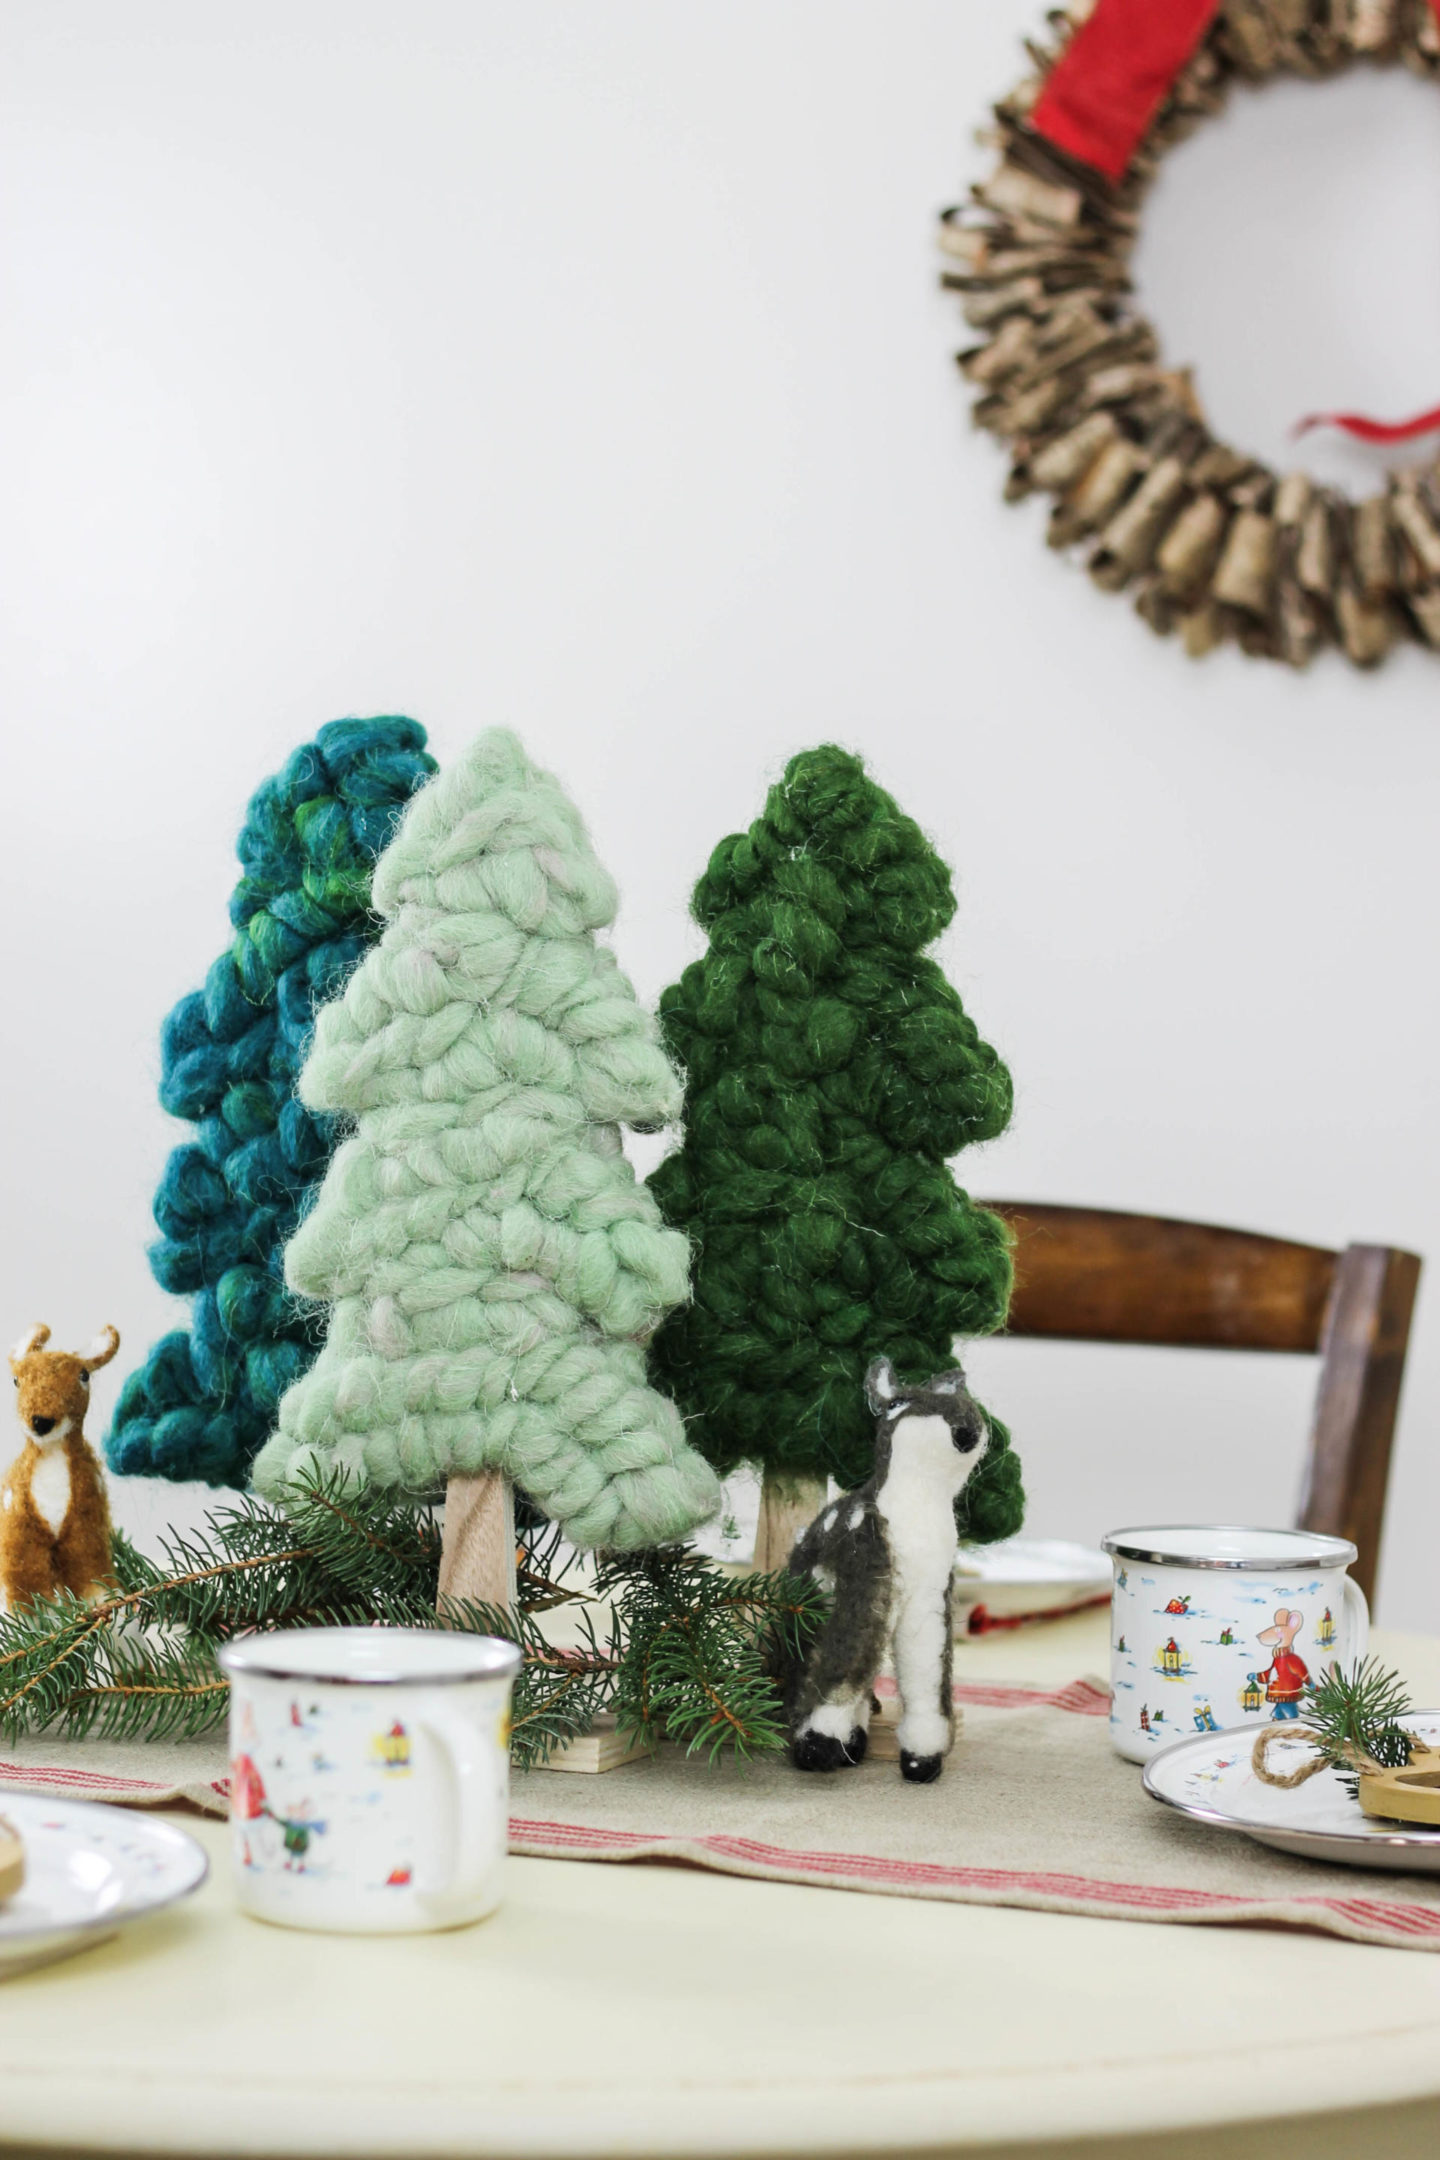 Easy Children's Christmas Tablescape With World Market by New York lifestyle blogger Style Waltz